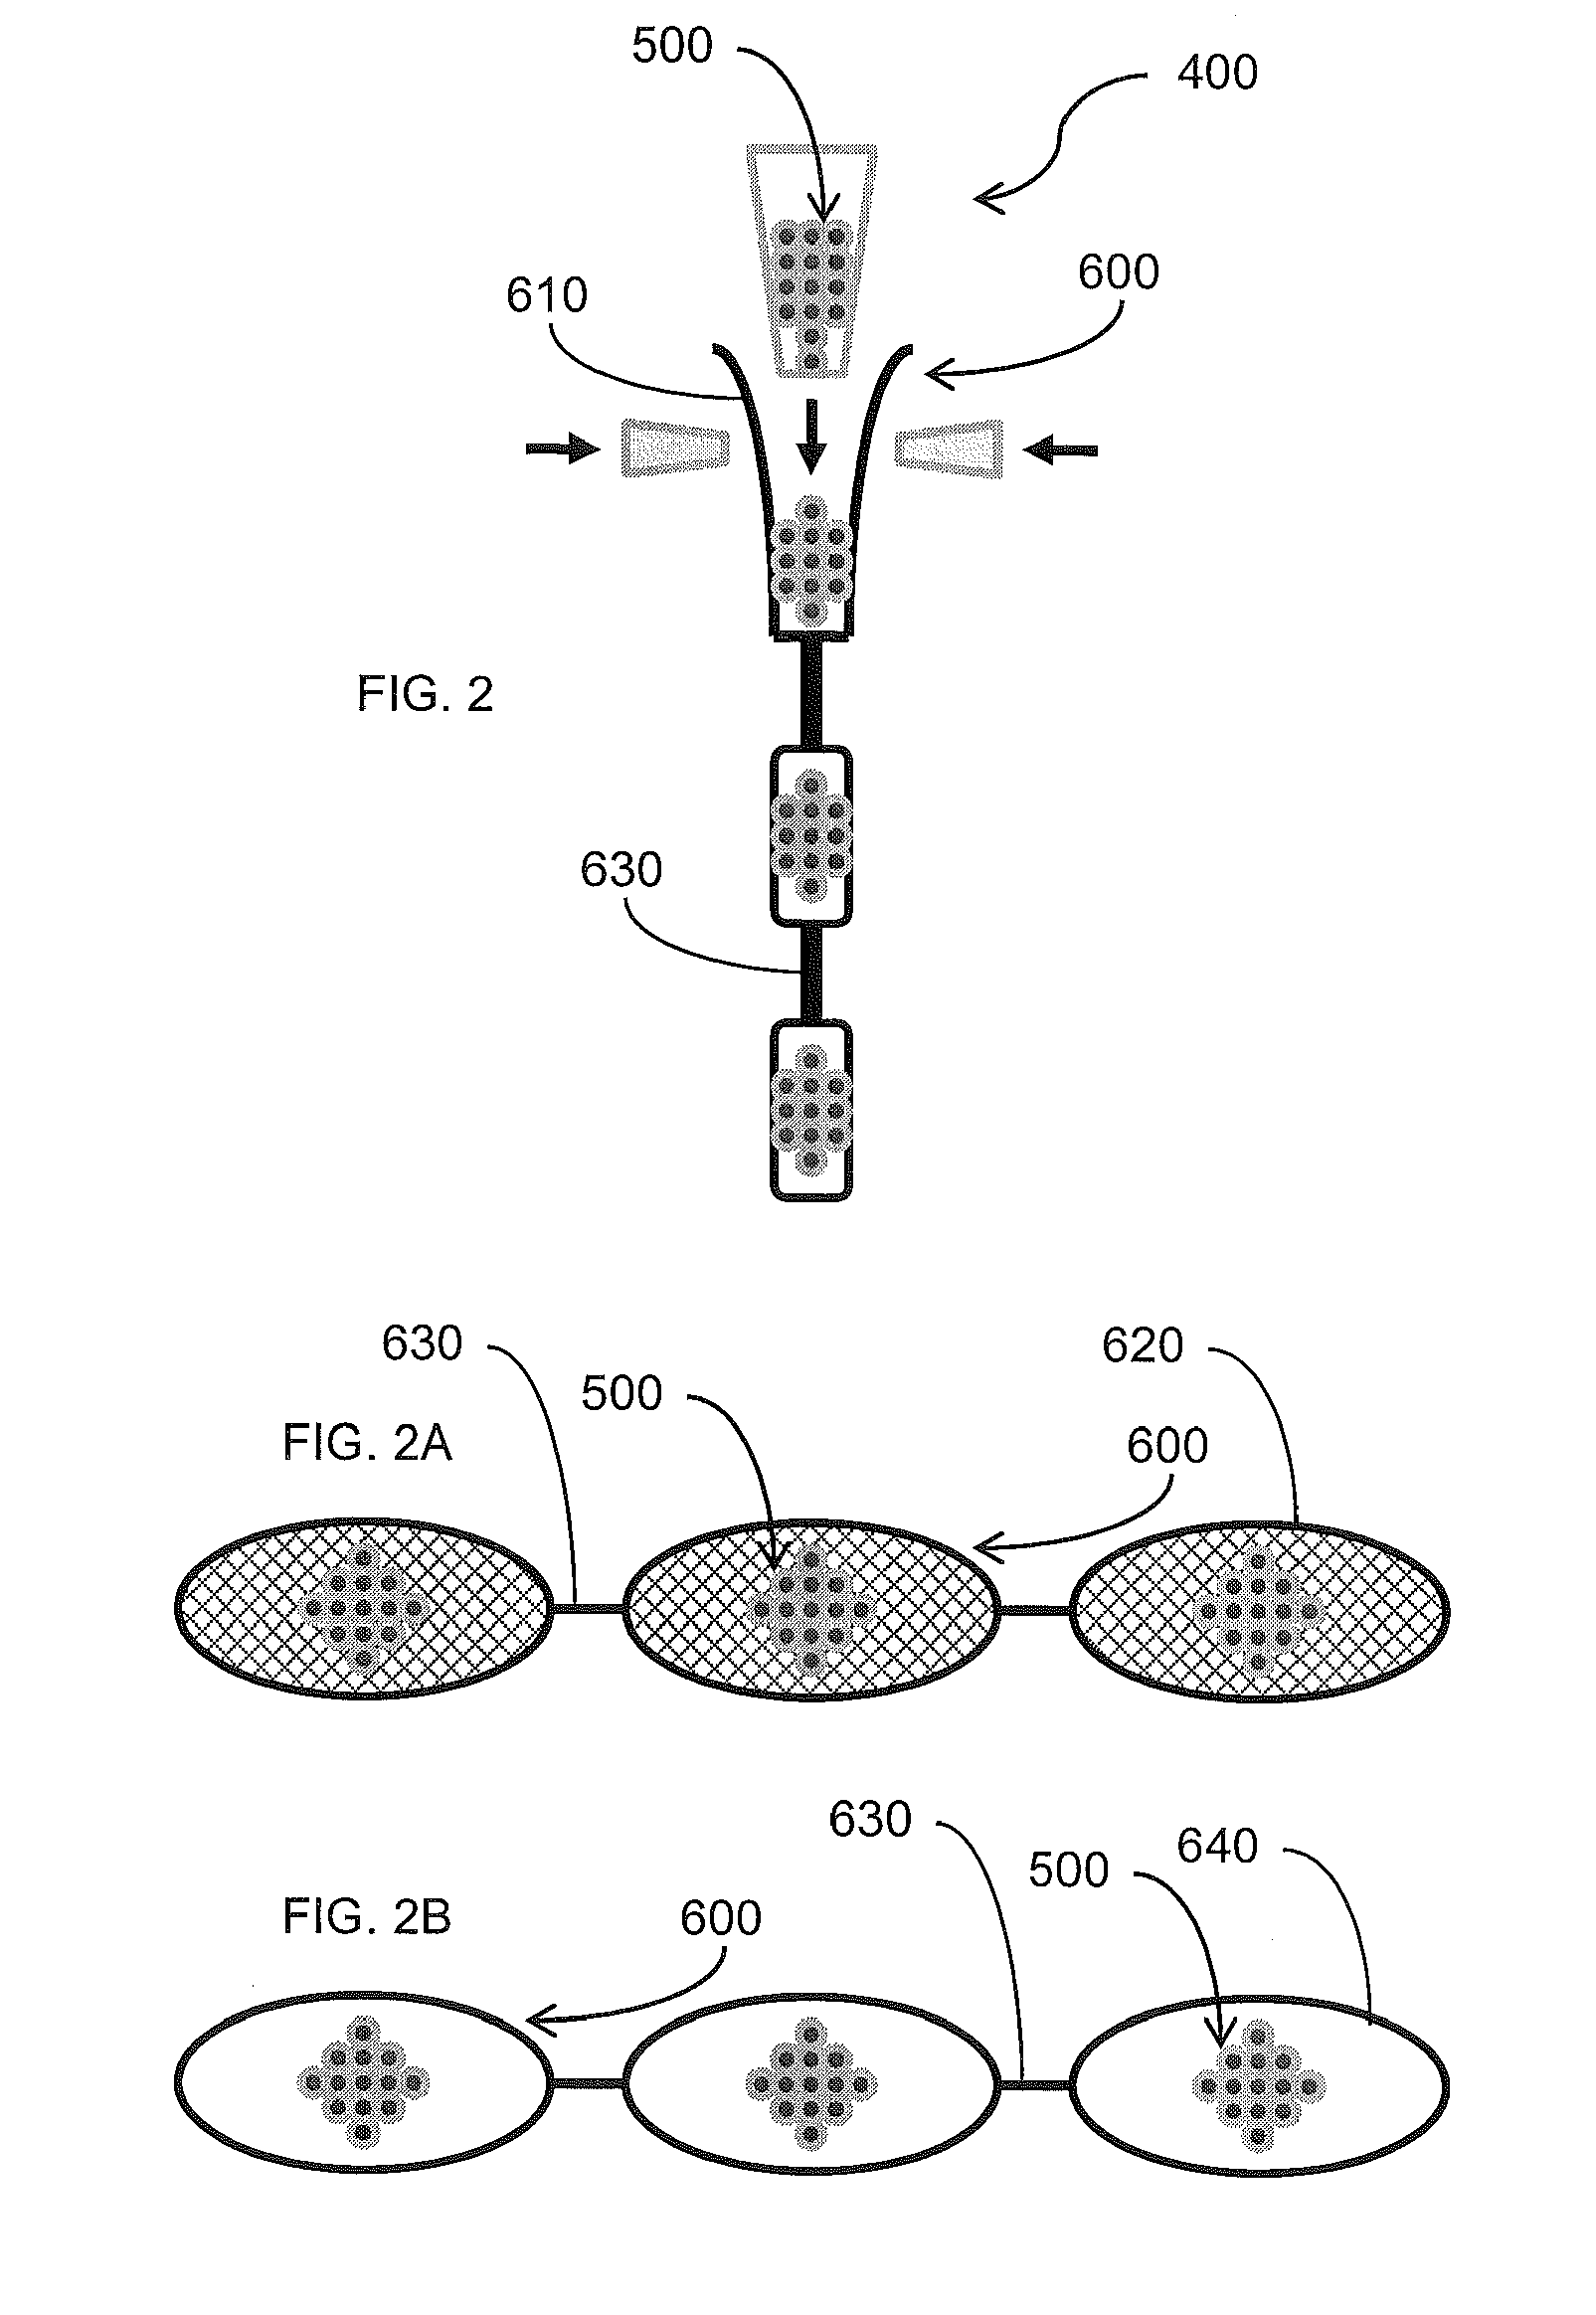 Apparatus for Inserting Microcapsule Objects into a Filter Element of a Smoking Article, and Associated Method